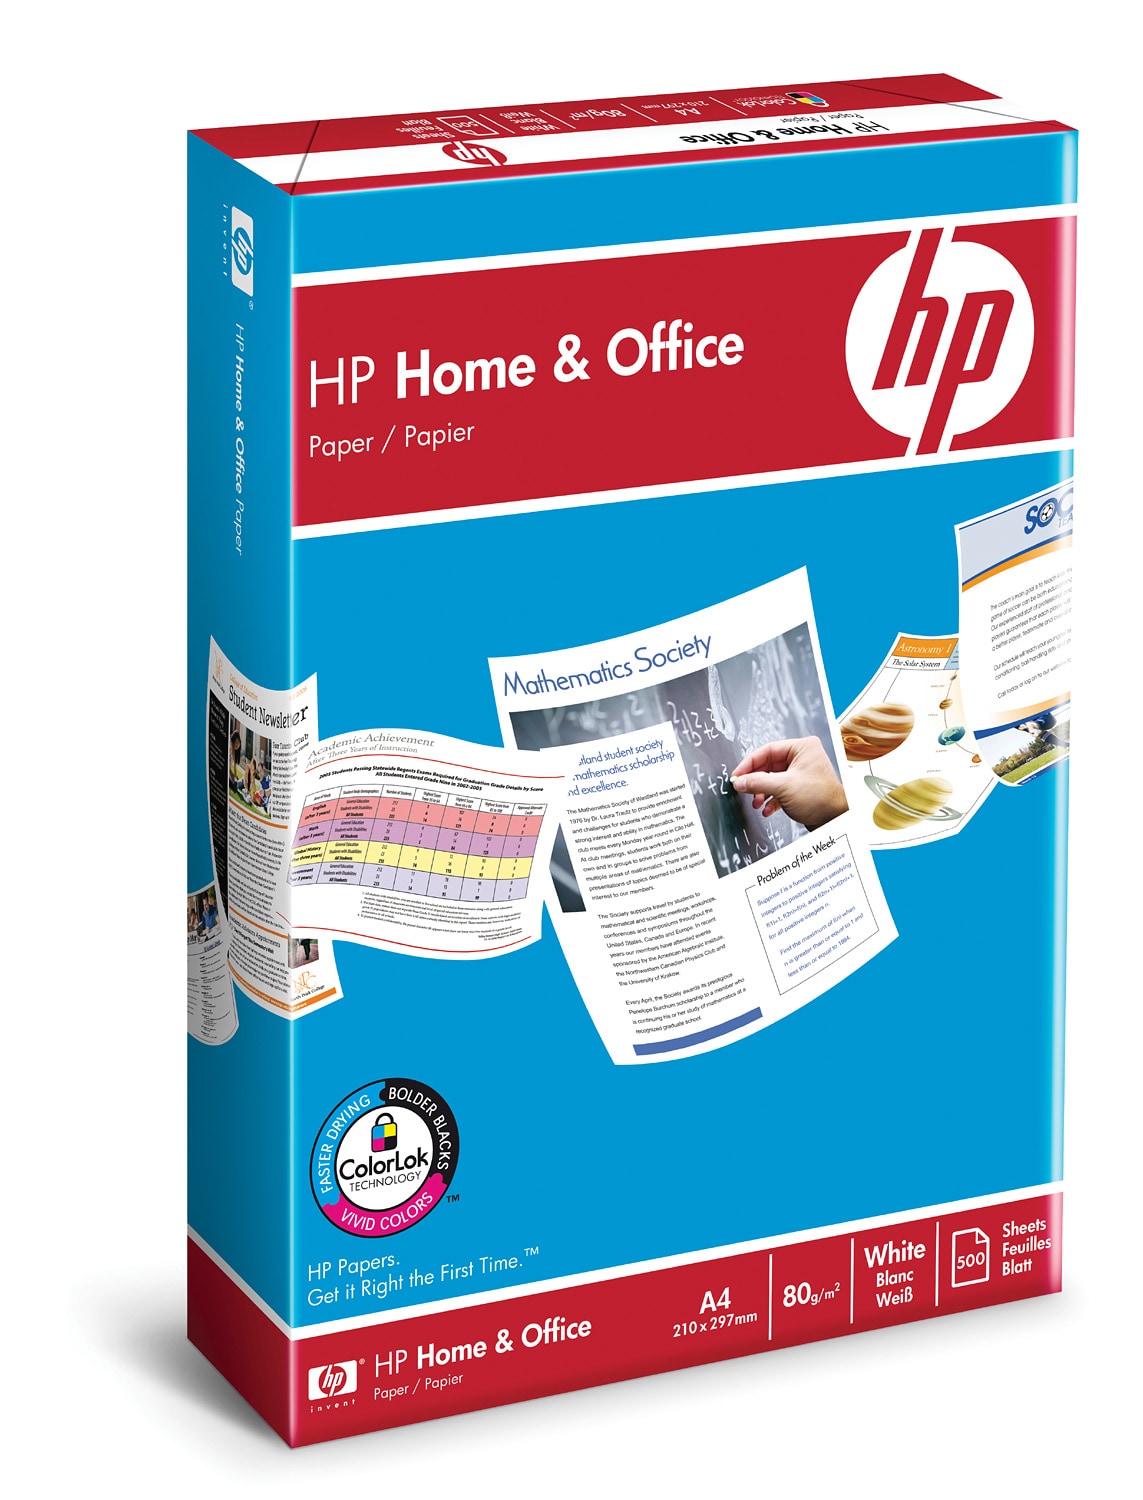 HP Home and Office Paper-500 sht/A4/210 x 297 mm | HP® Africa